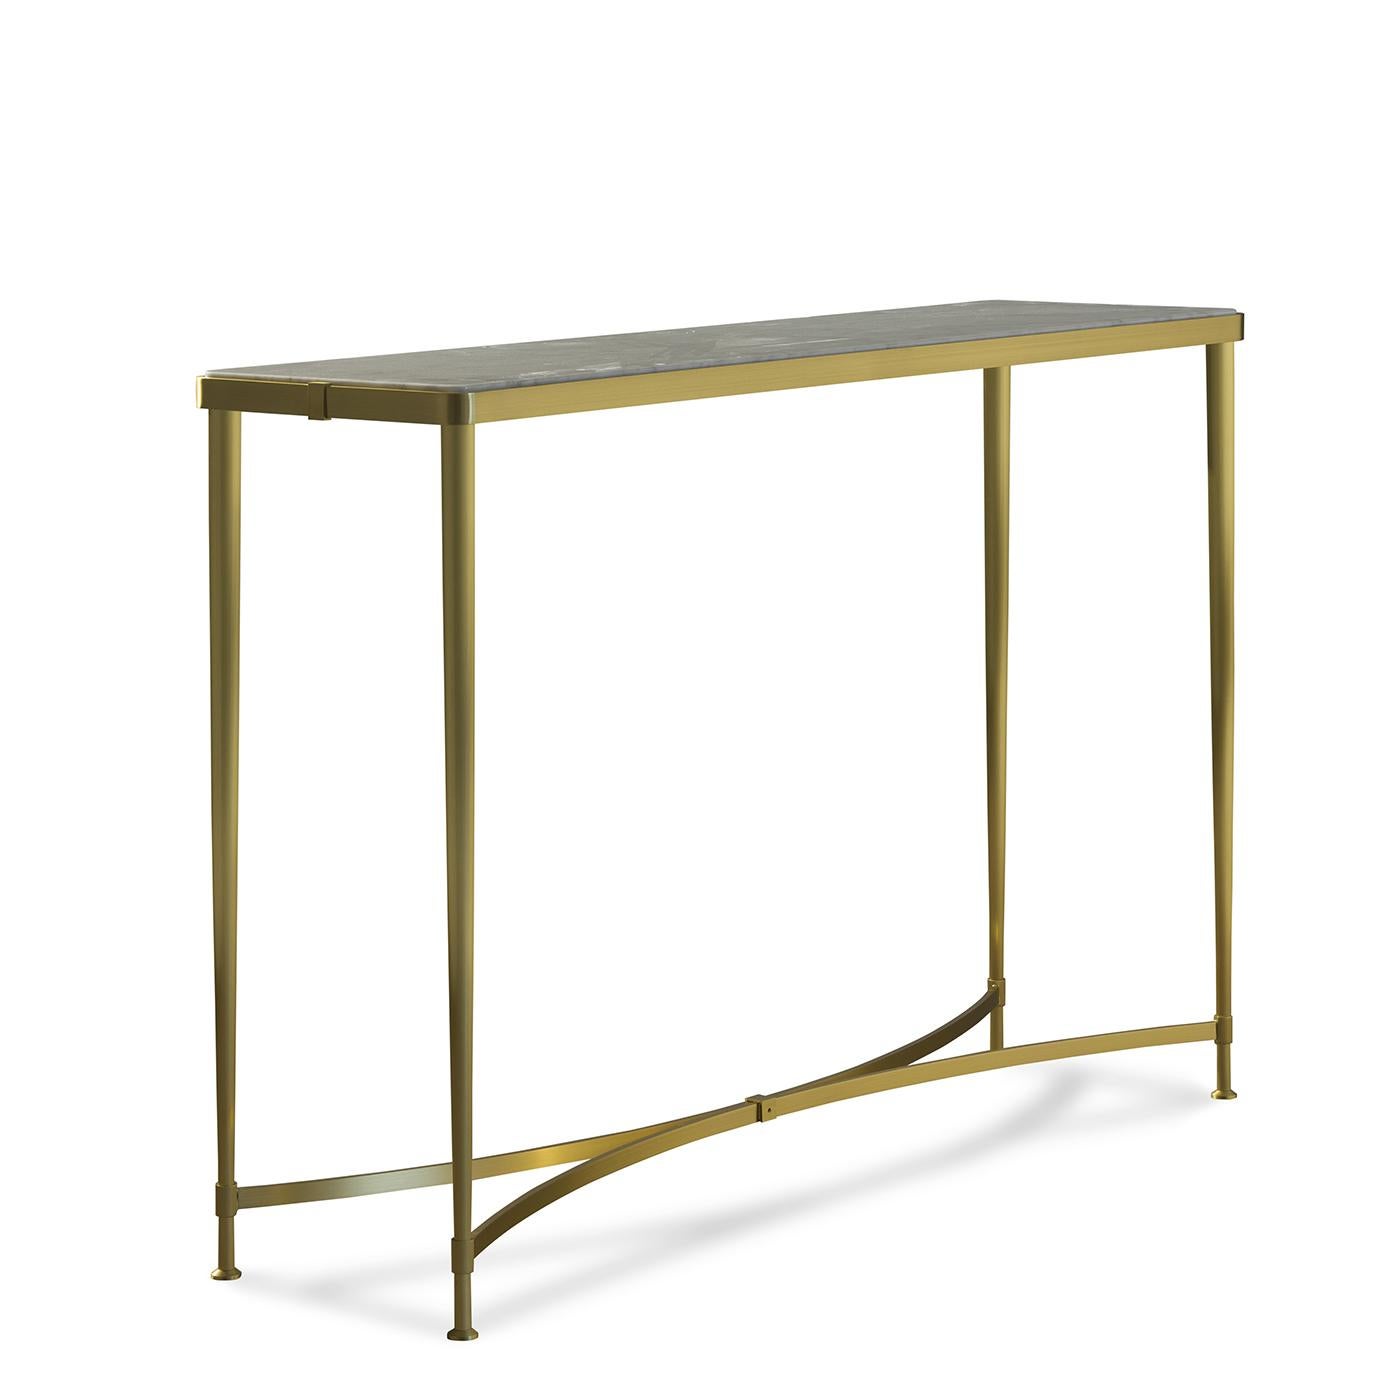 The linear Silhouette of this stunning console will be an exquisite addition to an entryway, setting the tone for an elegant home. Its structure in brass with a satin finish comprises a sinuous base that supports a set of four slim legs raising to